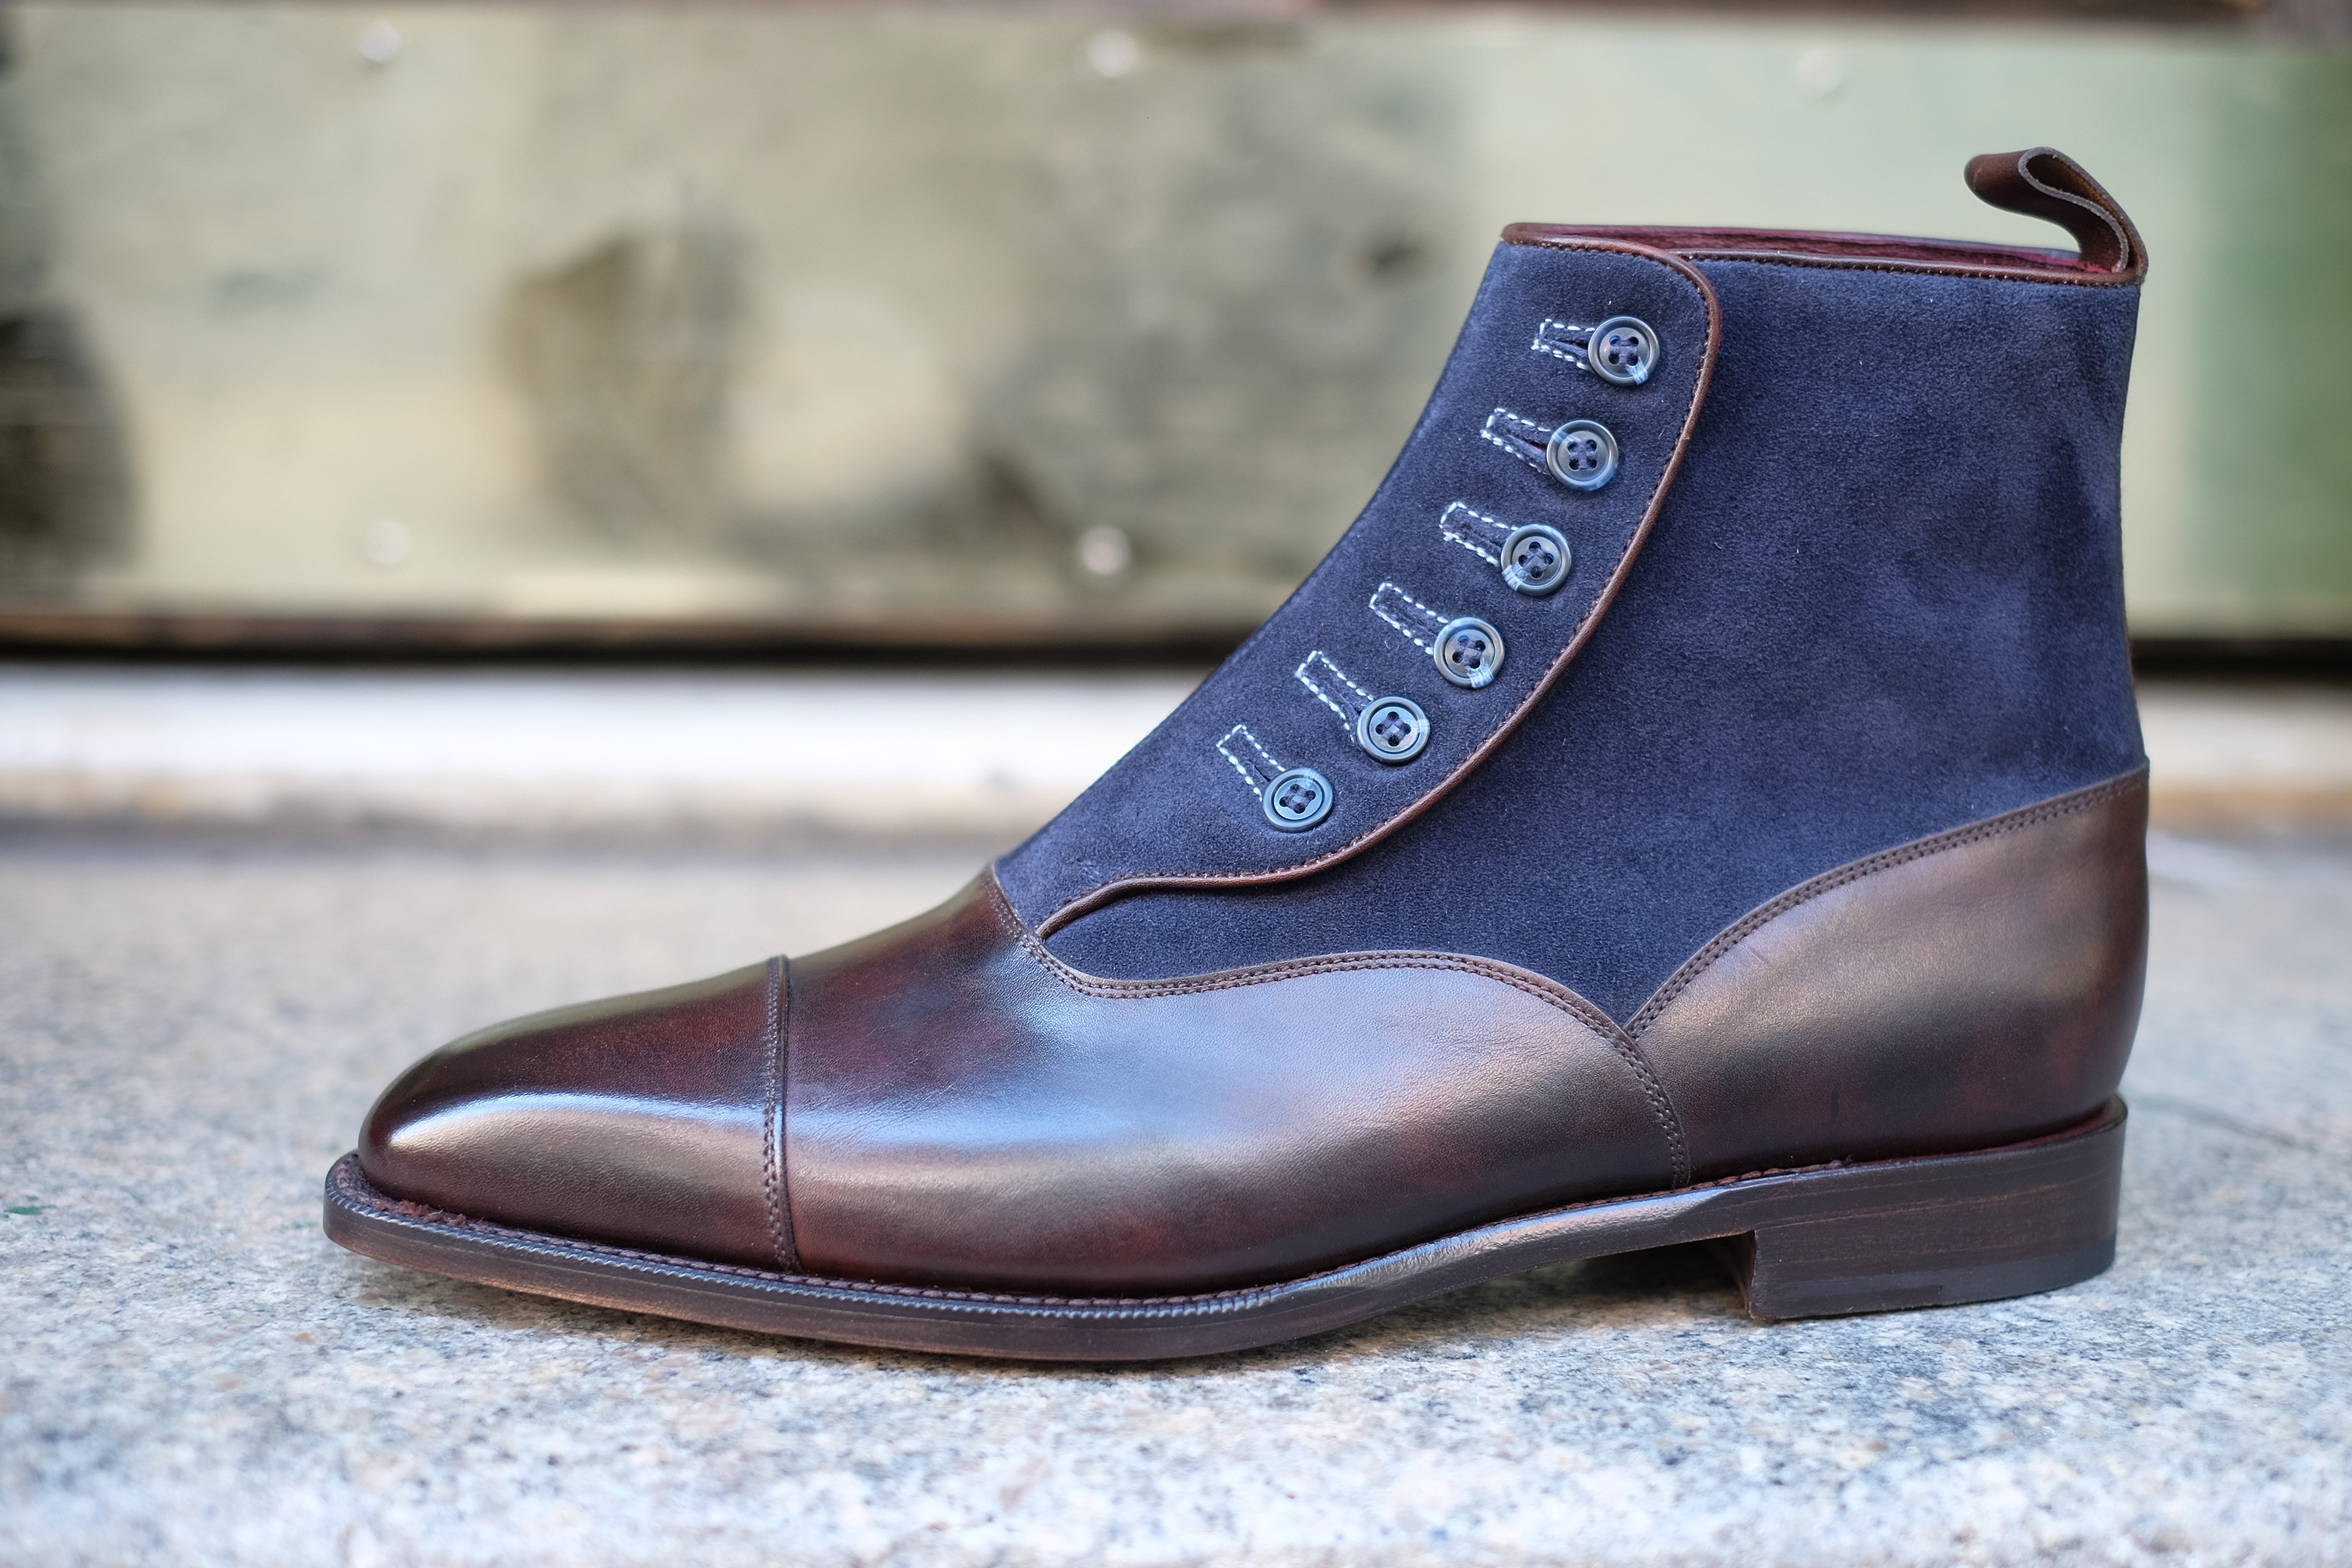 Bellevue - MTO - Dark Brown Museum Calf / Navy Suede - Sky Blue Stitching - Blue Buttons - MGF Last - Single Leather Sole